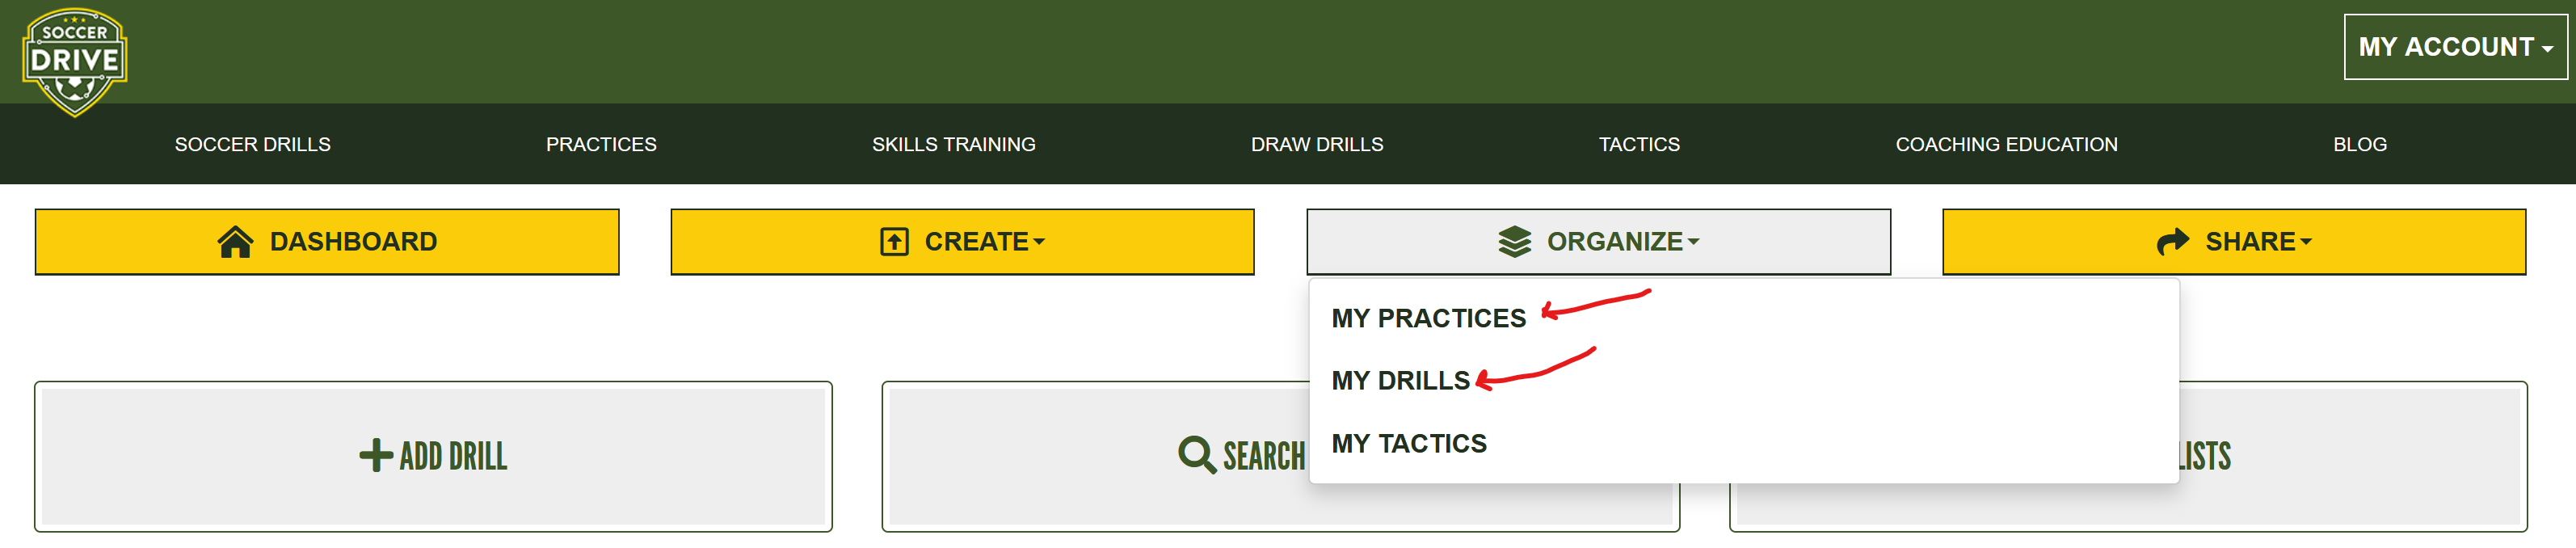 My drills and my practices link from navigation bar